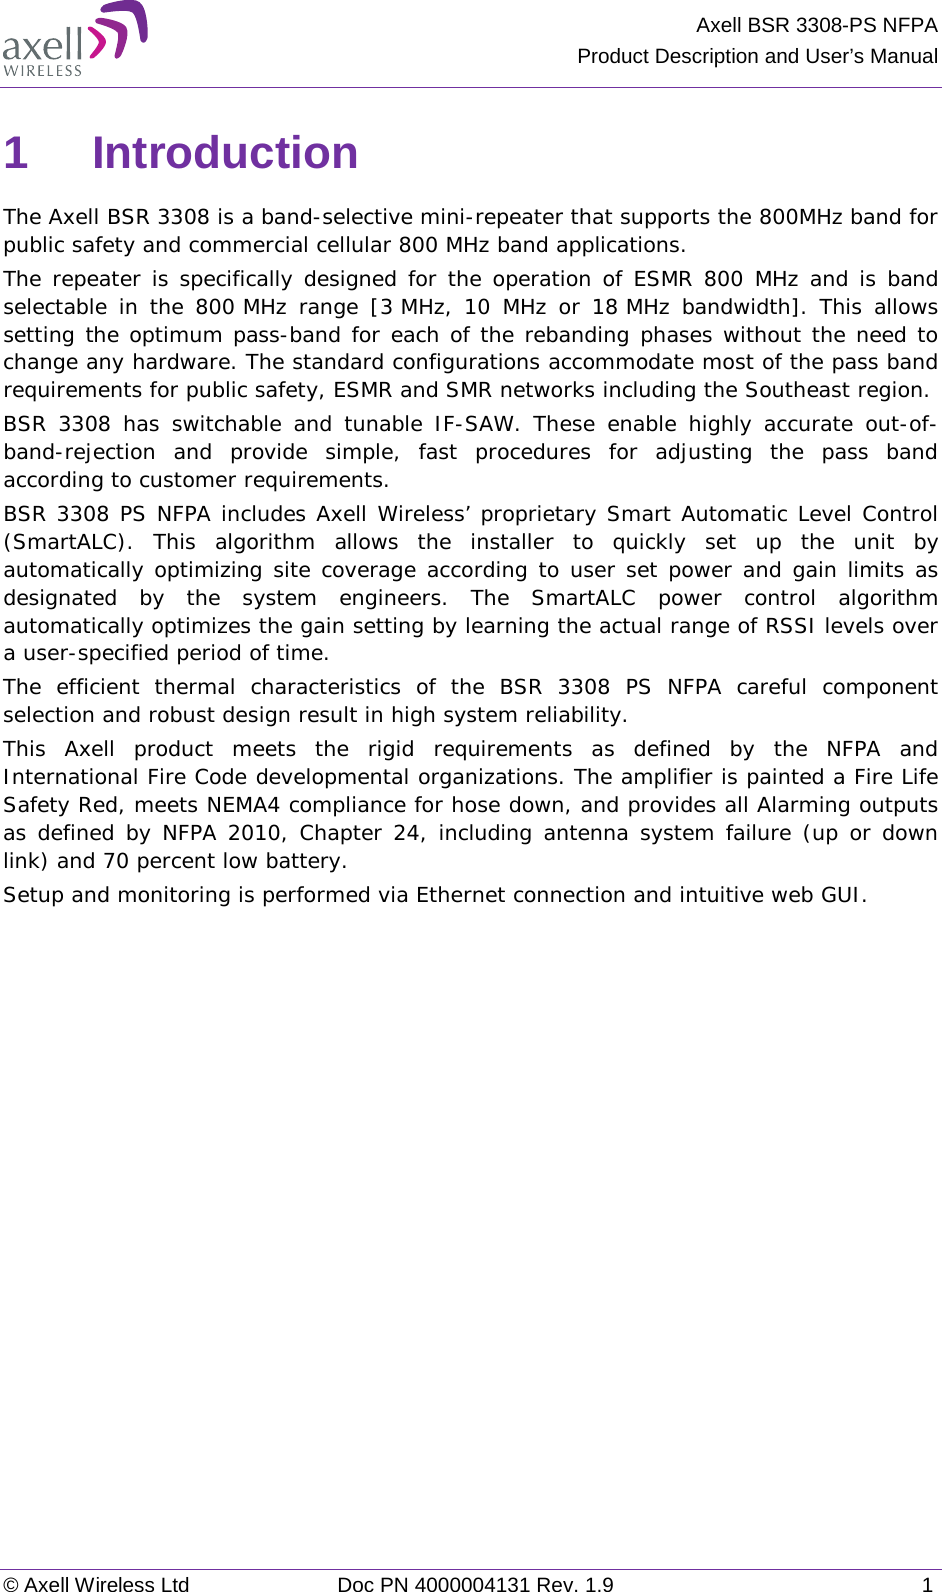  Axell BSR 3308-PS NFPA Product Description and User’s Manual  © Axell Wireless Ltd Doc PN 4000004131 Rev. 1.9  1  1  Introduction  The Axell BSR 3308 is a band-selective mini-repeater that supports the 800MHz band for public safety and commercial cellular 800 MHz band applications.  The repeater is specifically designed for the operation of ESMR 800 MHz and is band selectable in the 800 MHz range [3 MHz, 10 MHz or  18 MHz bandwidth]. This allows setting the optimum pass-band for each of the rebanding phases without the need to change any hardware. The standard configurations accommodate most of the pass band requirements for public safety, ESMR and SMR networks including the Southeast region. BSR 3308 has switchable and tunable IF-SAW. These enable highly accurate out-of-band-rejection  and provide simple, fast procedures for adjusting the pass band according to customer requirements. BSR 3308 PS NFPA includes Axell Wireless’ proprietary Smart Automatic Level Control (SmartALC).  This algorithm allows the installer to quickly set up the unit by automatically optimizing site coverage according to user set power and gain limits as designated by the system engineers. The SmartALC power control algorithm automatically optimizes the gain setting by learning the actual range of RSSI levels over a user-specified period of time.  The efficient thermal characteristics of the BSR 3308 PS NFPA careful component selection and robust design result in high system reliability. This Axell product meets the rigid requirements as defined by the NFPA and International Fire Code developmental organizations. The amplifier is painted a Fire Life Safety Red, meets NEMA4 compliance for hose down, and provides all Alarming outputs as defined by NFPA 2010, Chapter 24, including antenna system failure (up or down link) and 70 percent low battery.  Setup and monitoring is performed via Ethernet connection and intuitive web GUI.   